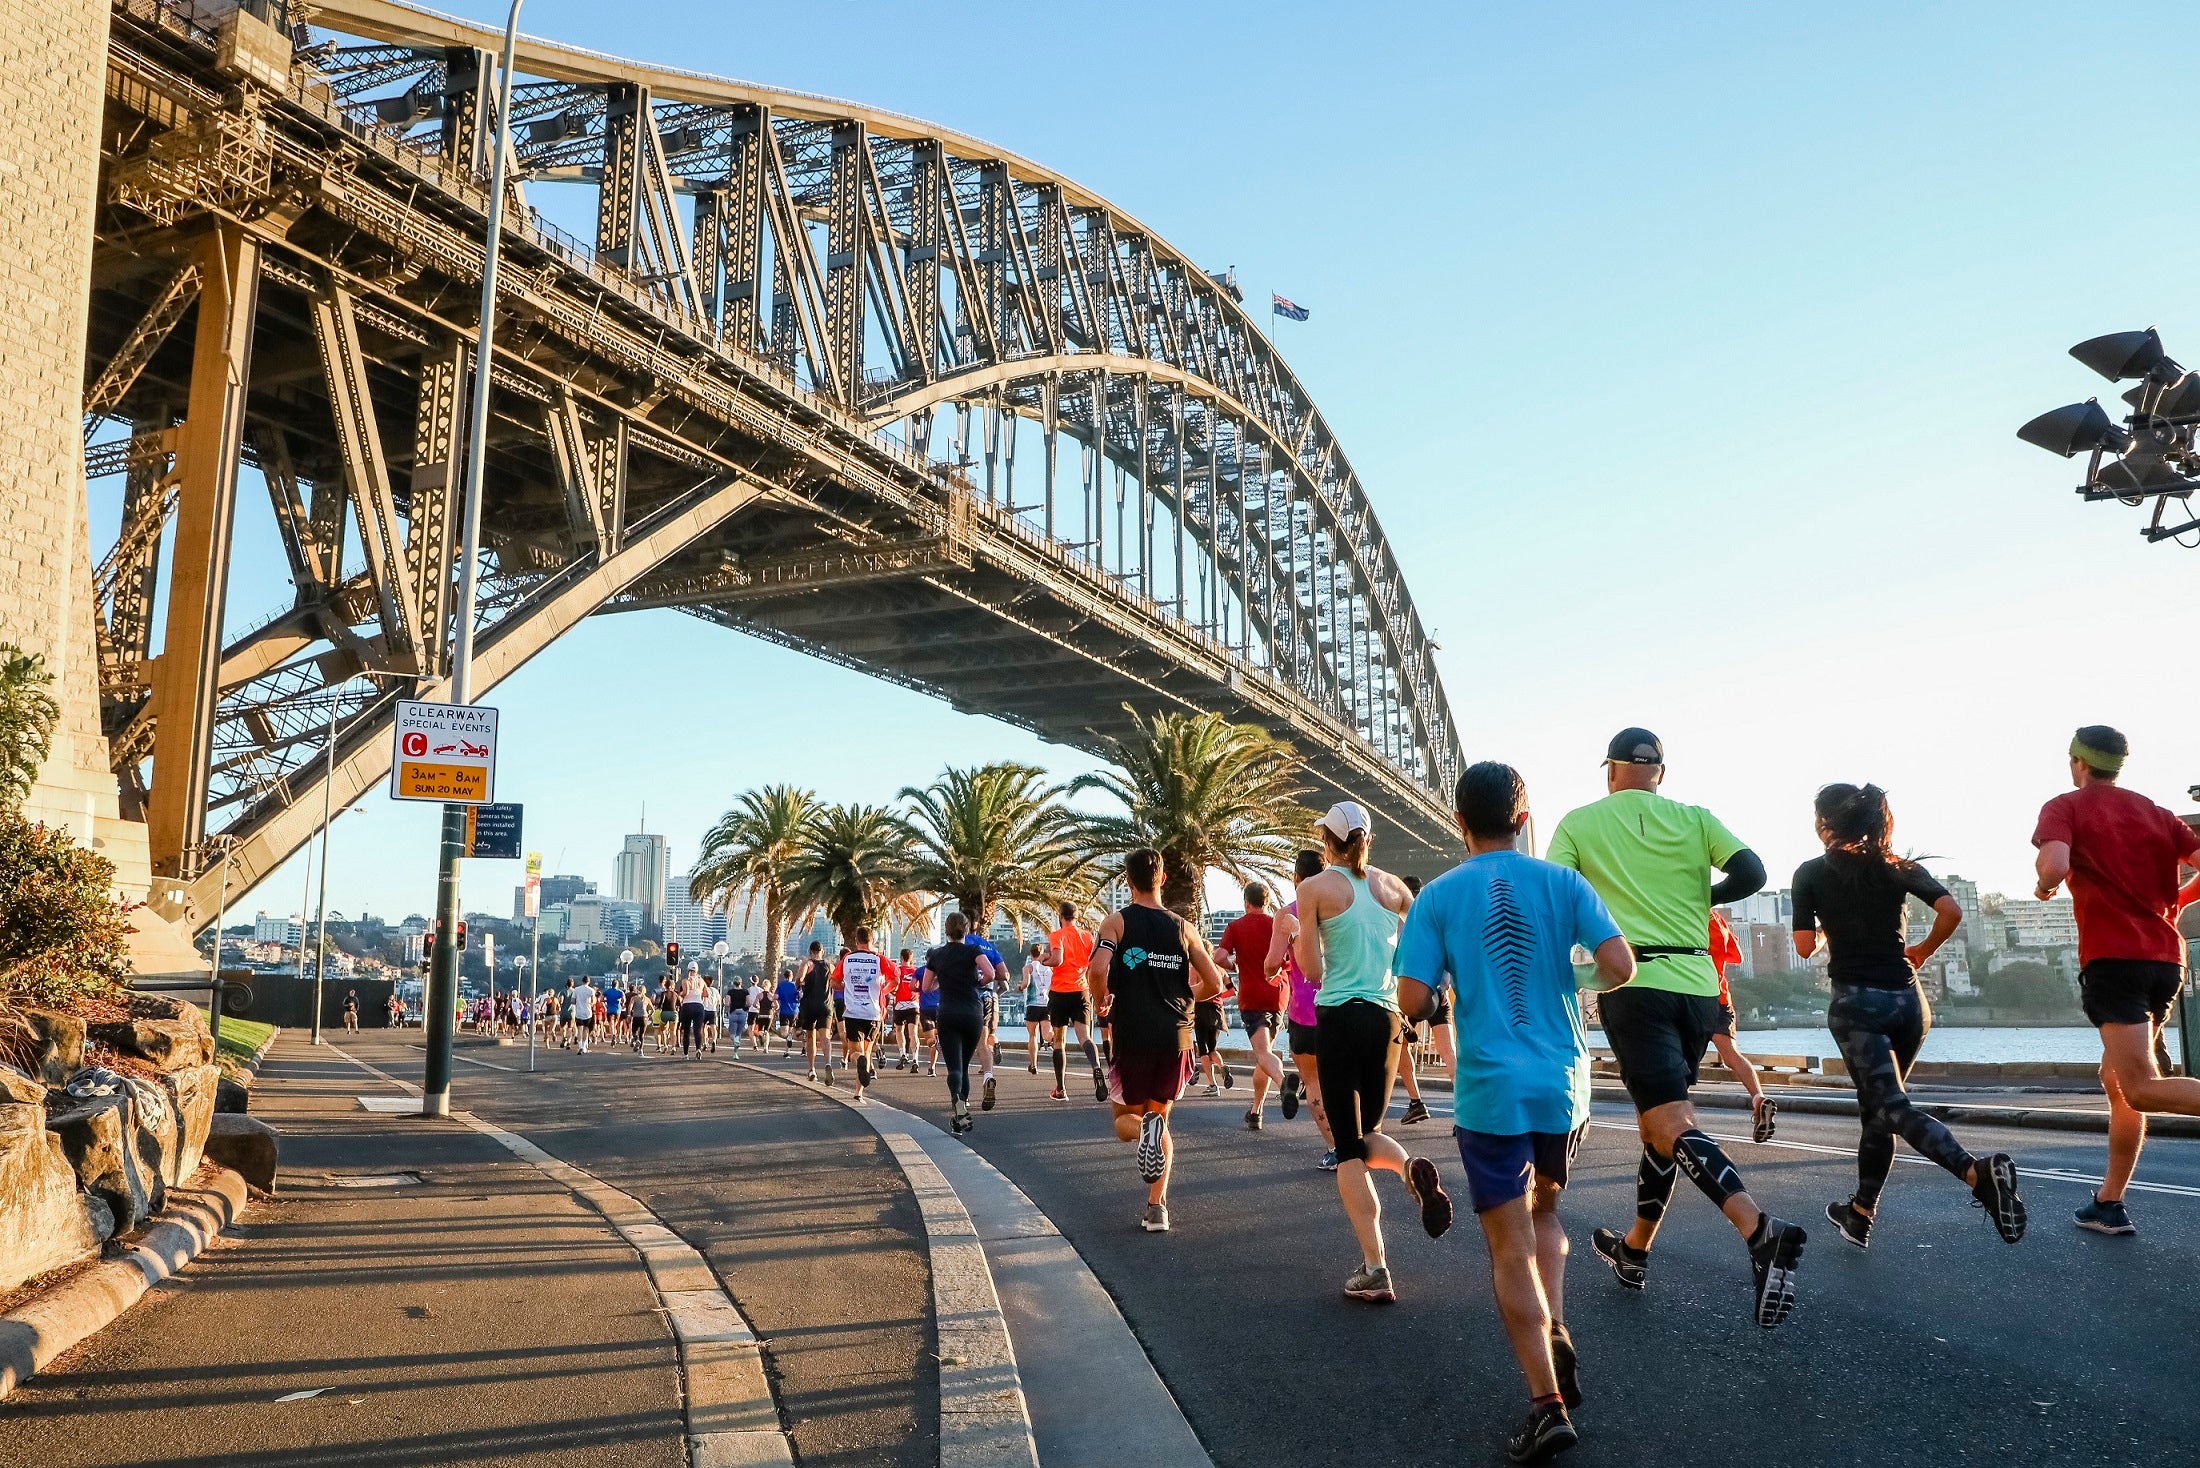 The Sydney Harbour Bridge and people running on the road that goes under it.